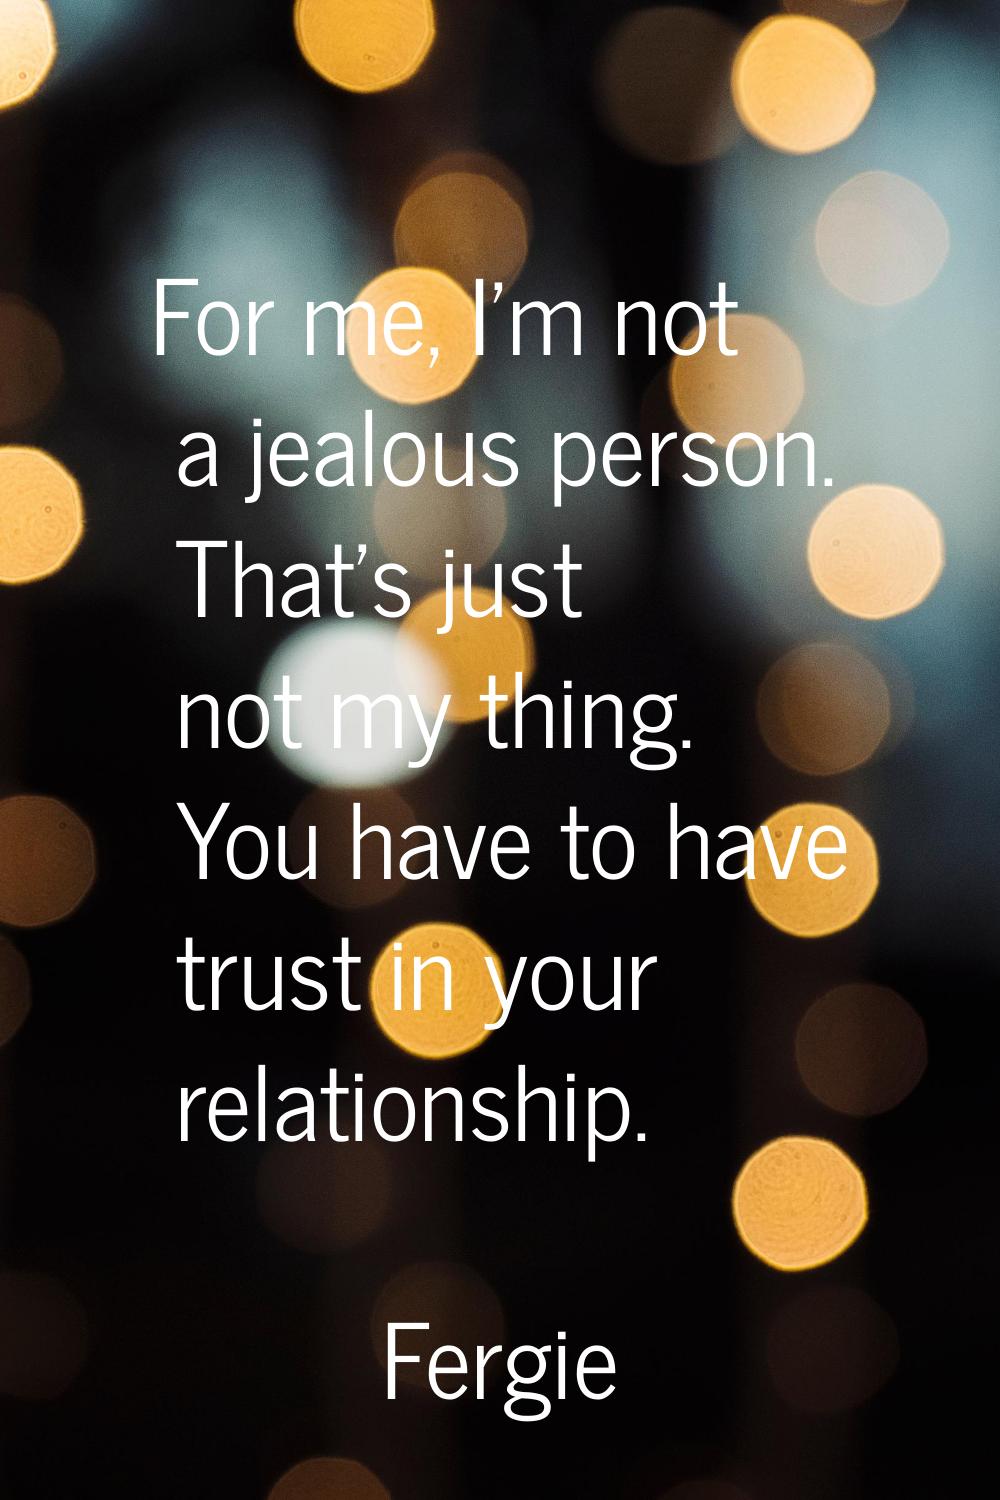 For me, I'm not a jealous person. That's just not my thing. You have to have trust in your relation